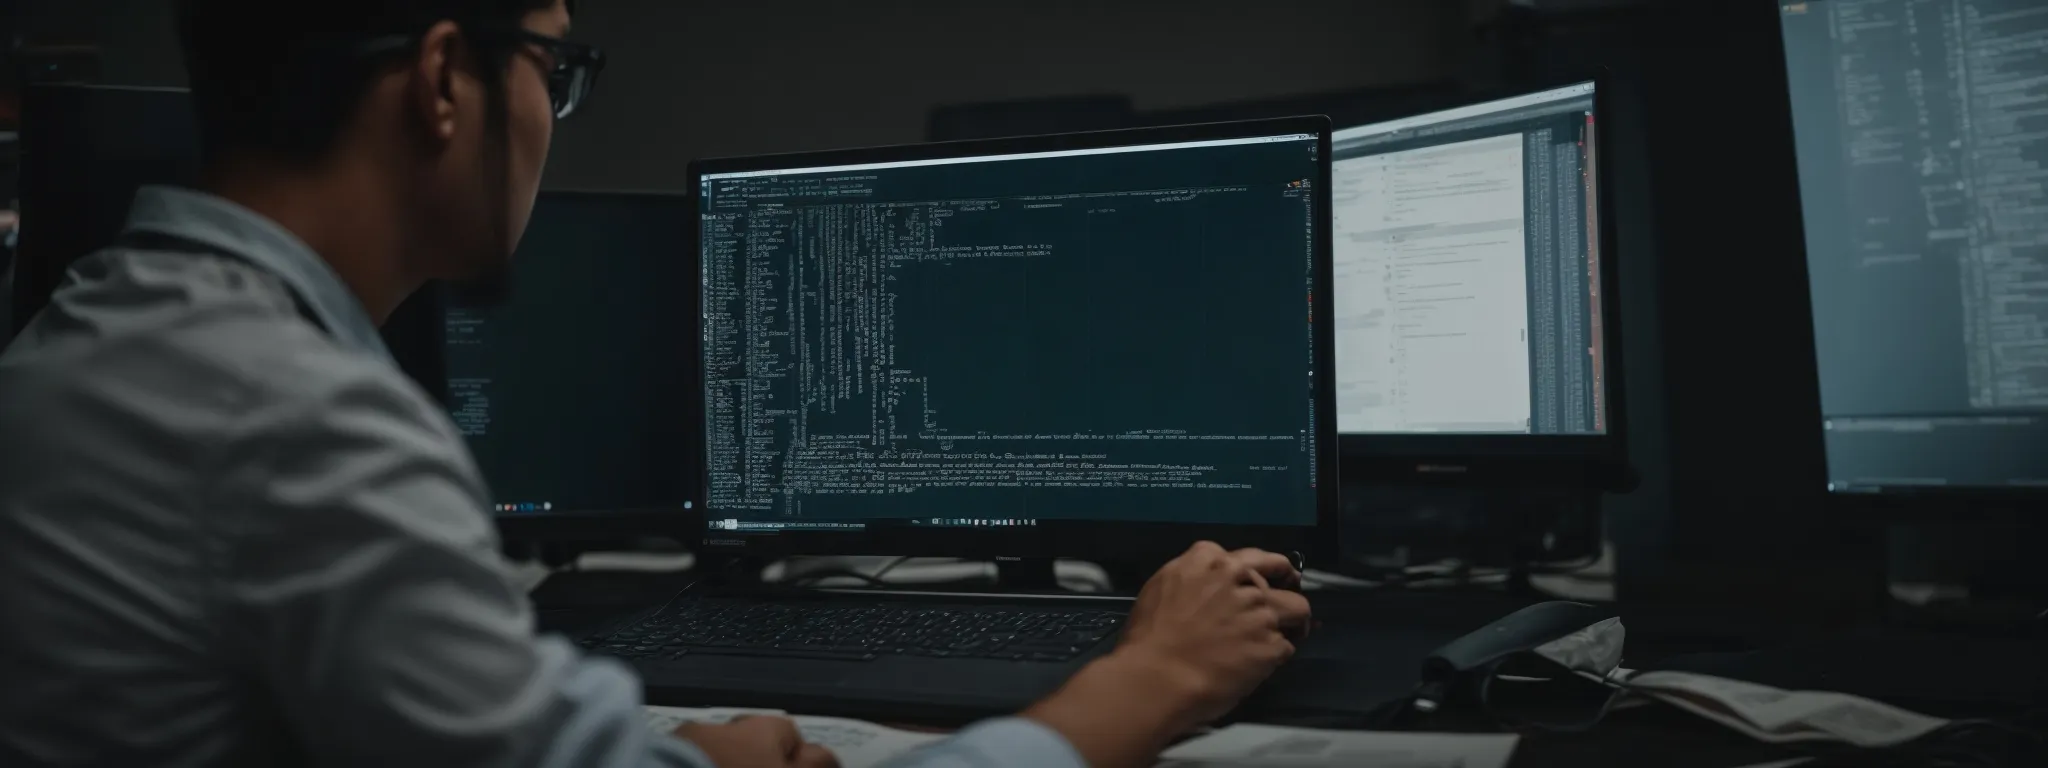 a web developer intently scrutinizes code on a computer screen, optimizing a website's backend for peak technical seo performance.